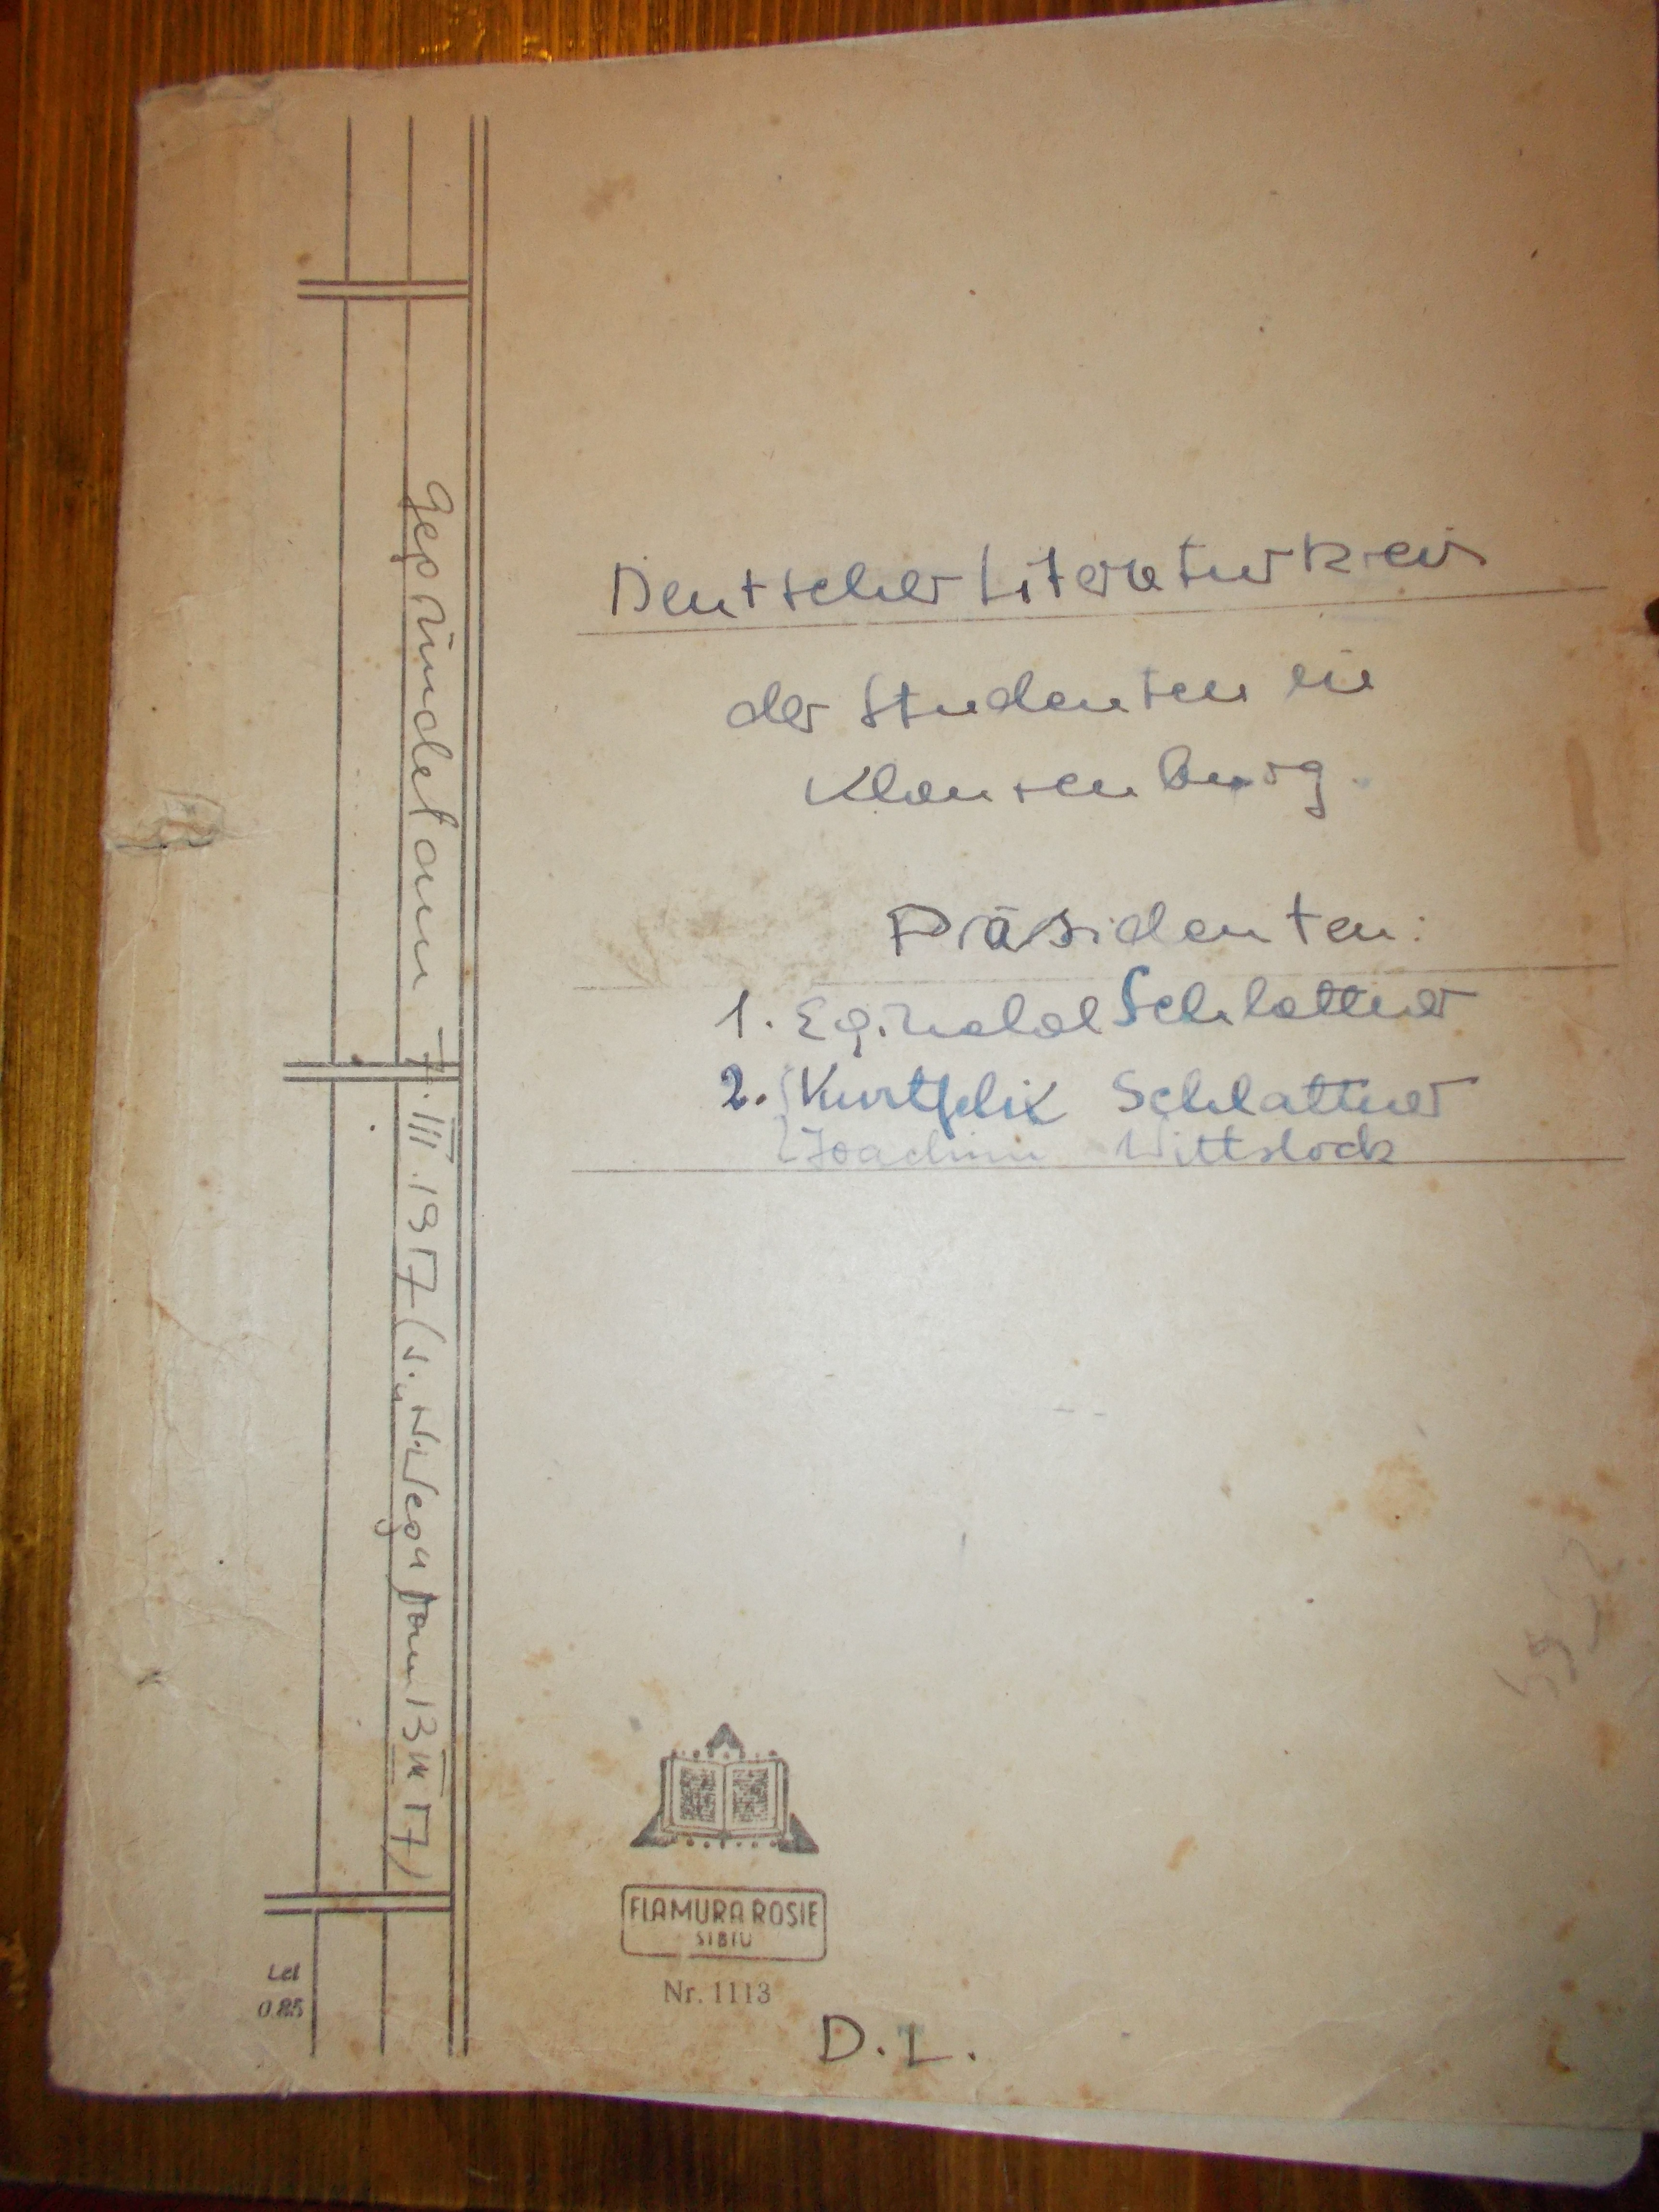 File of the German literary circle in Cluj which the Securitate confiscated from Eginald Schlattner